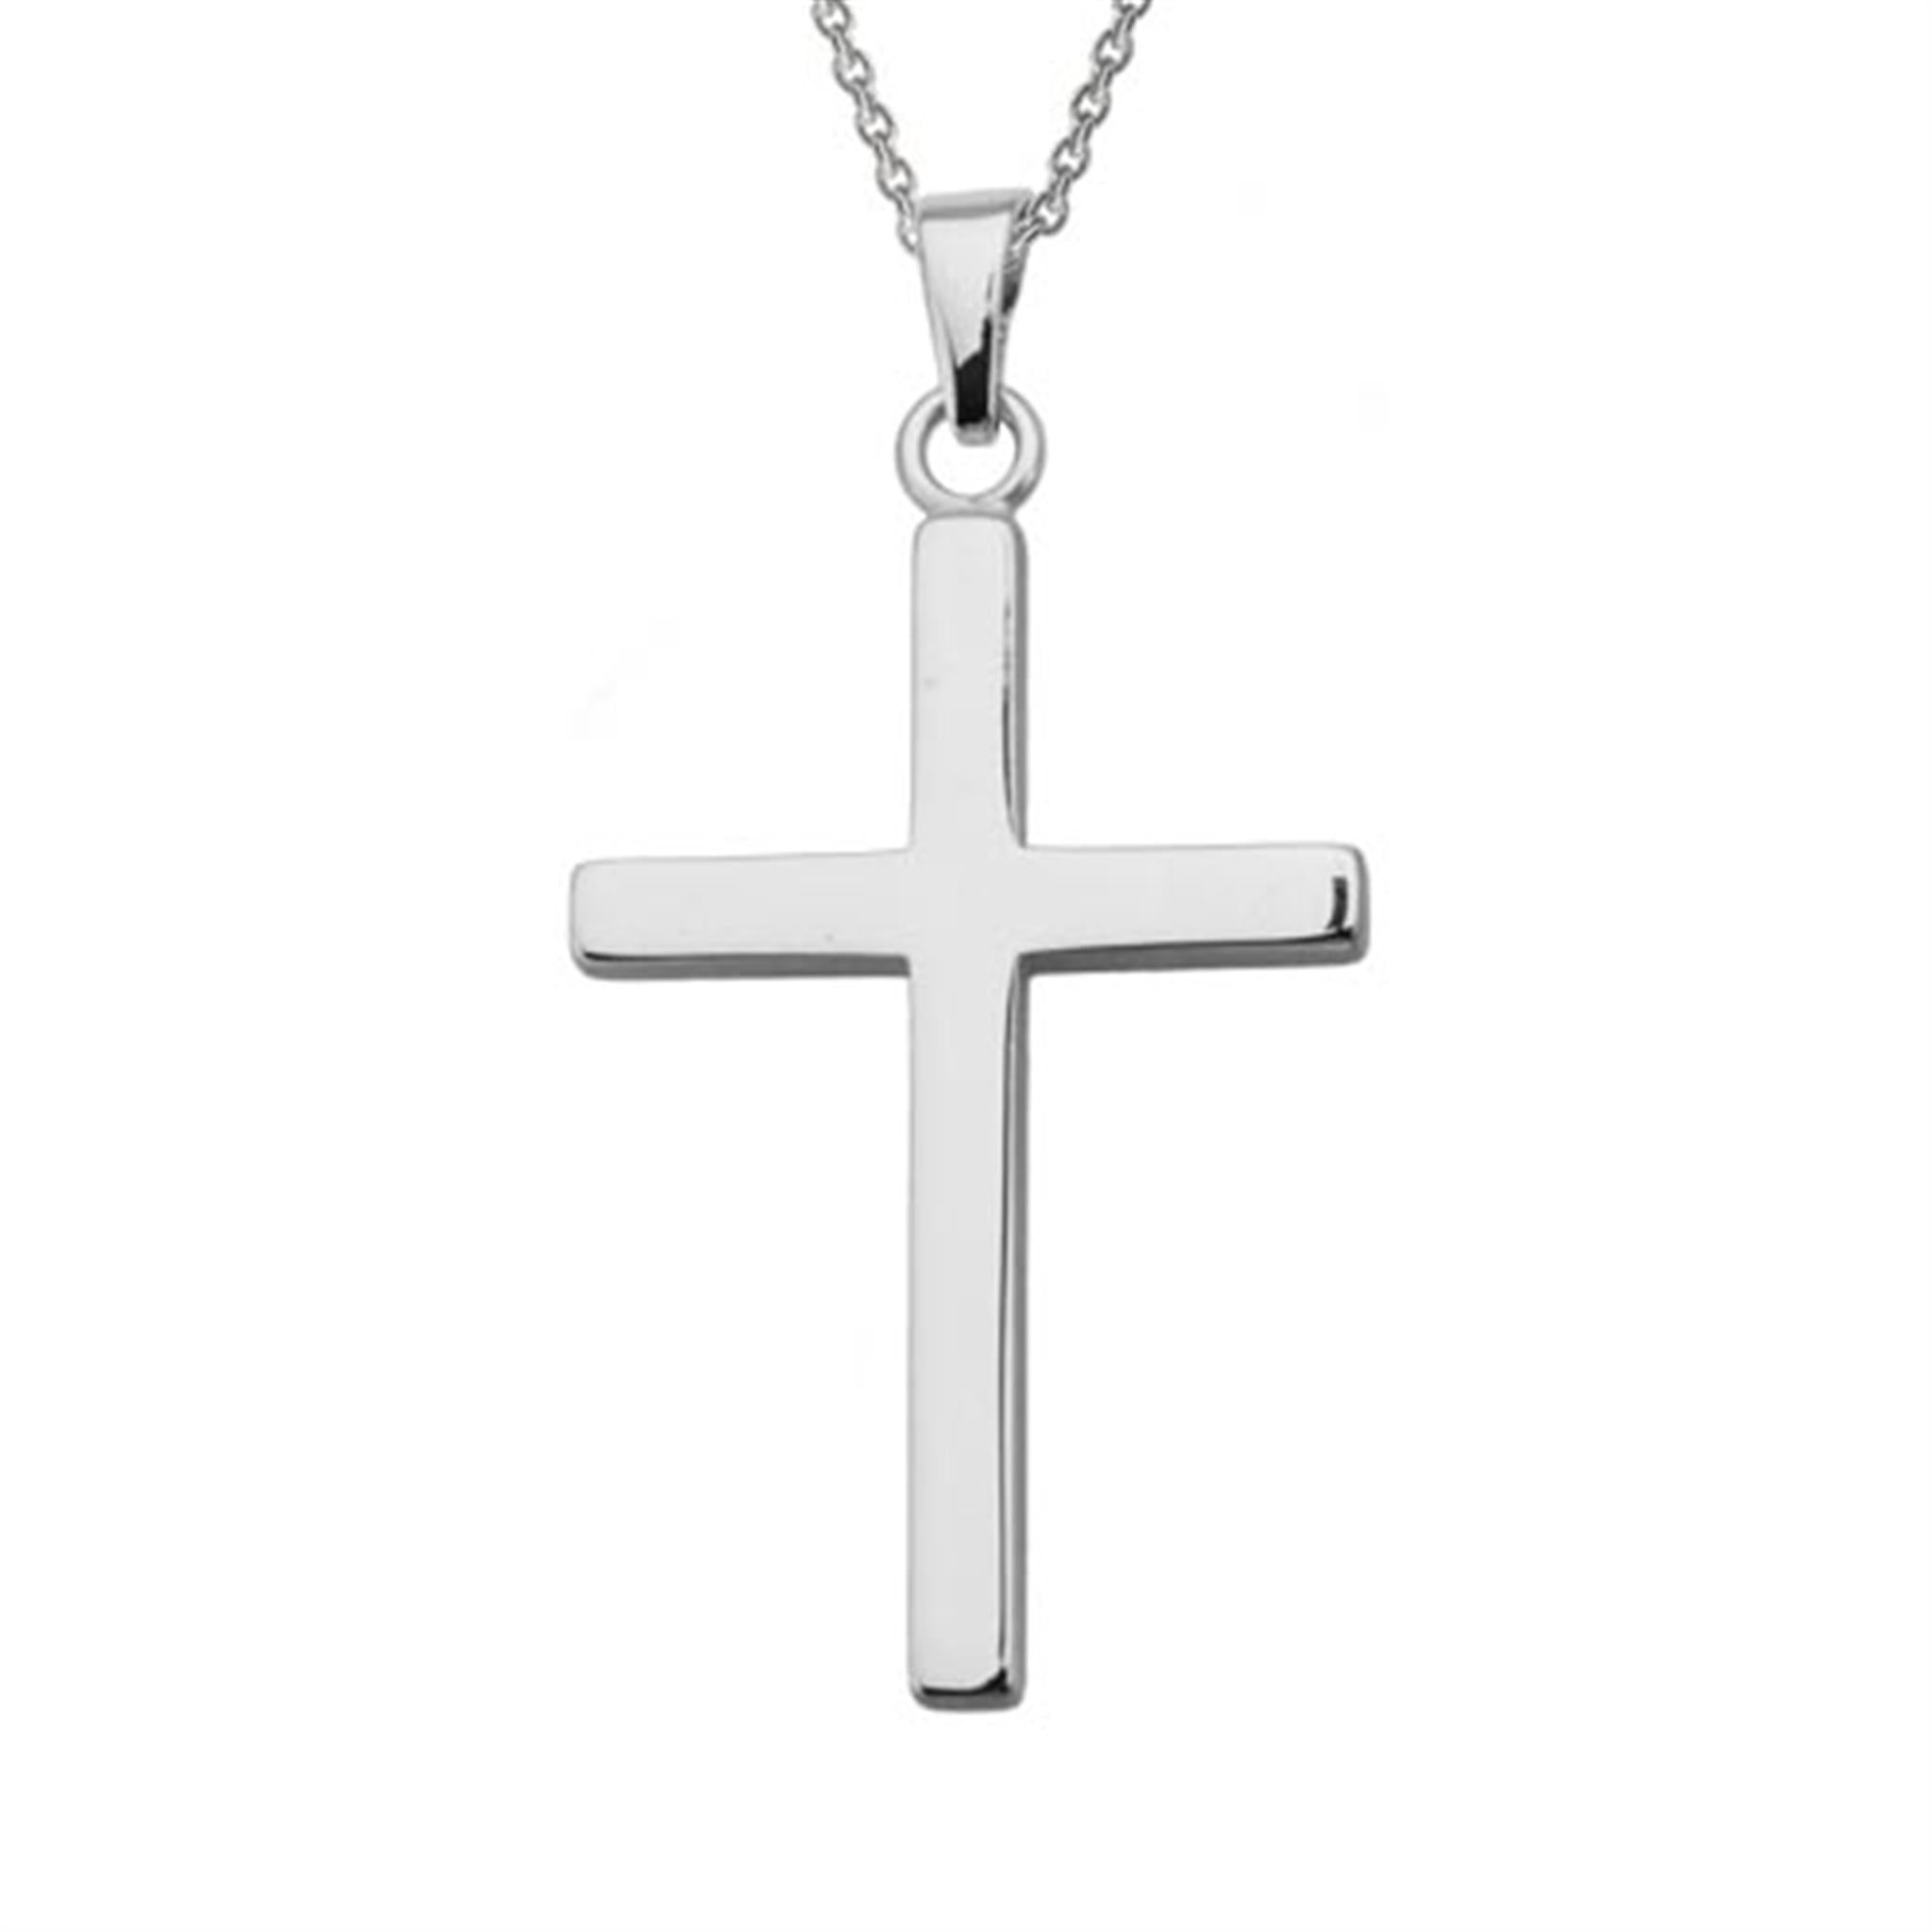 Rounded Gold Cross Pendant Necklace for Men | Classy Men Collection